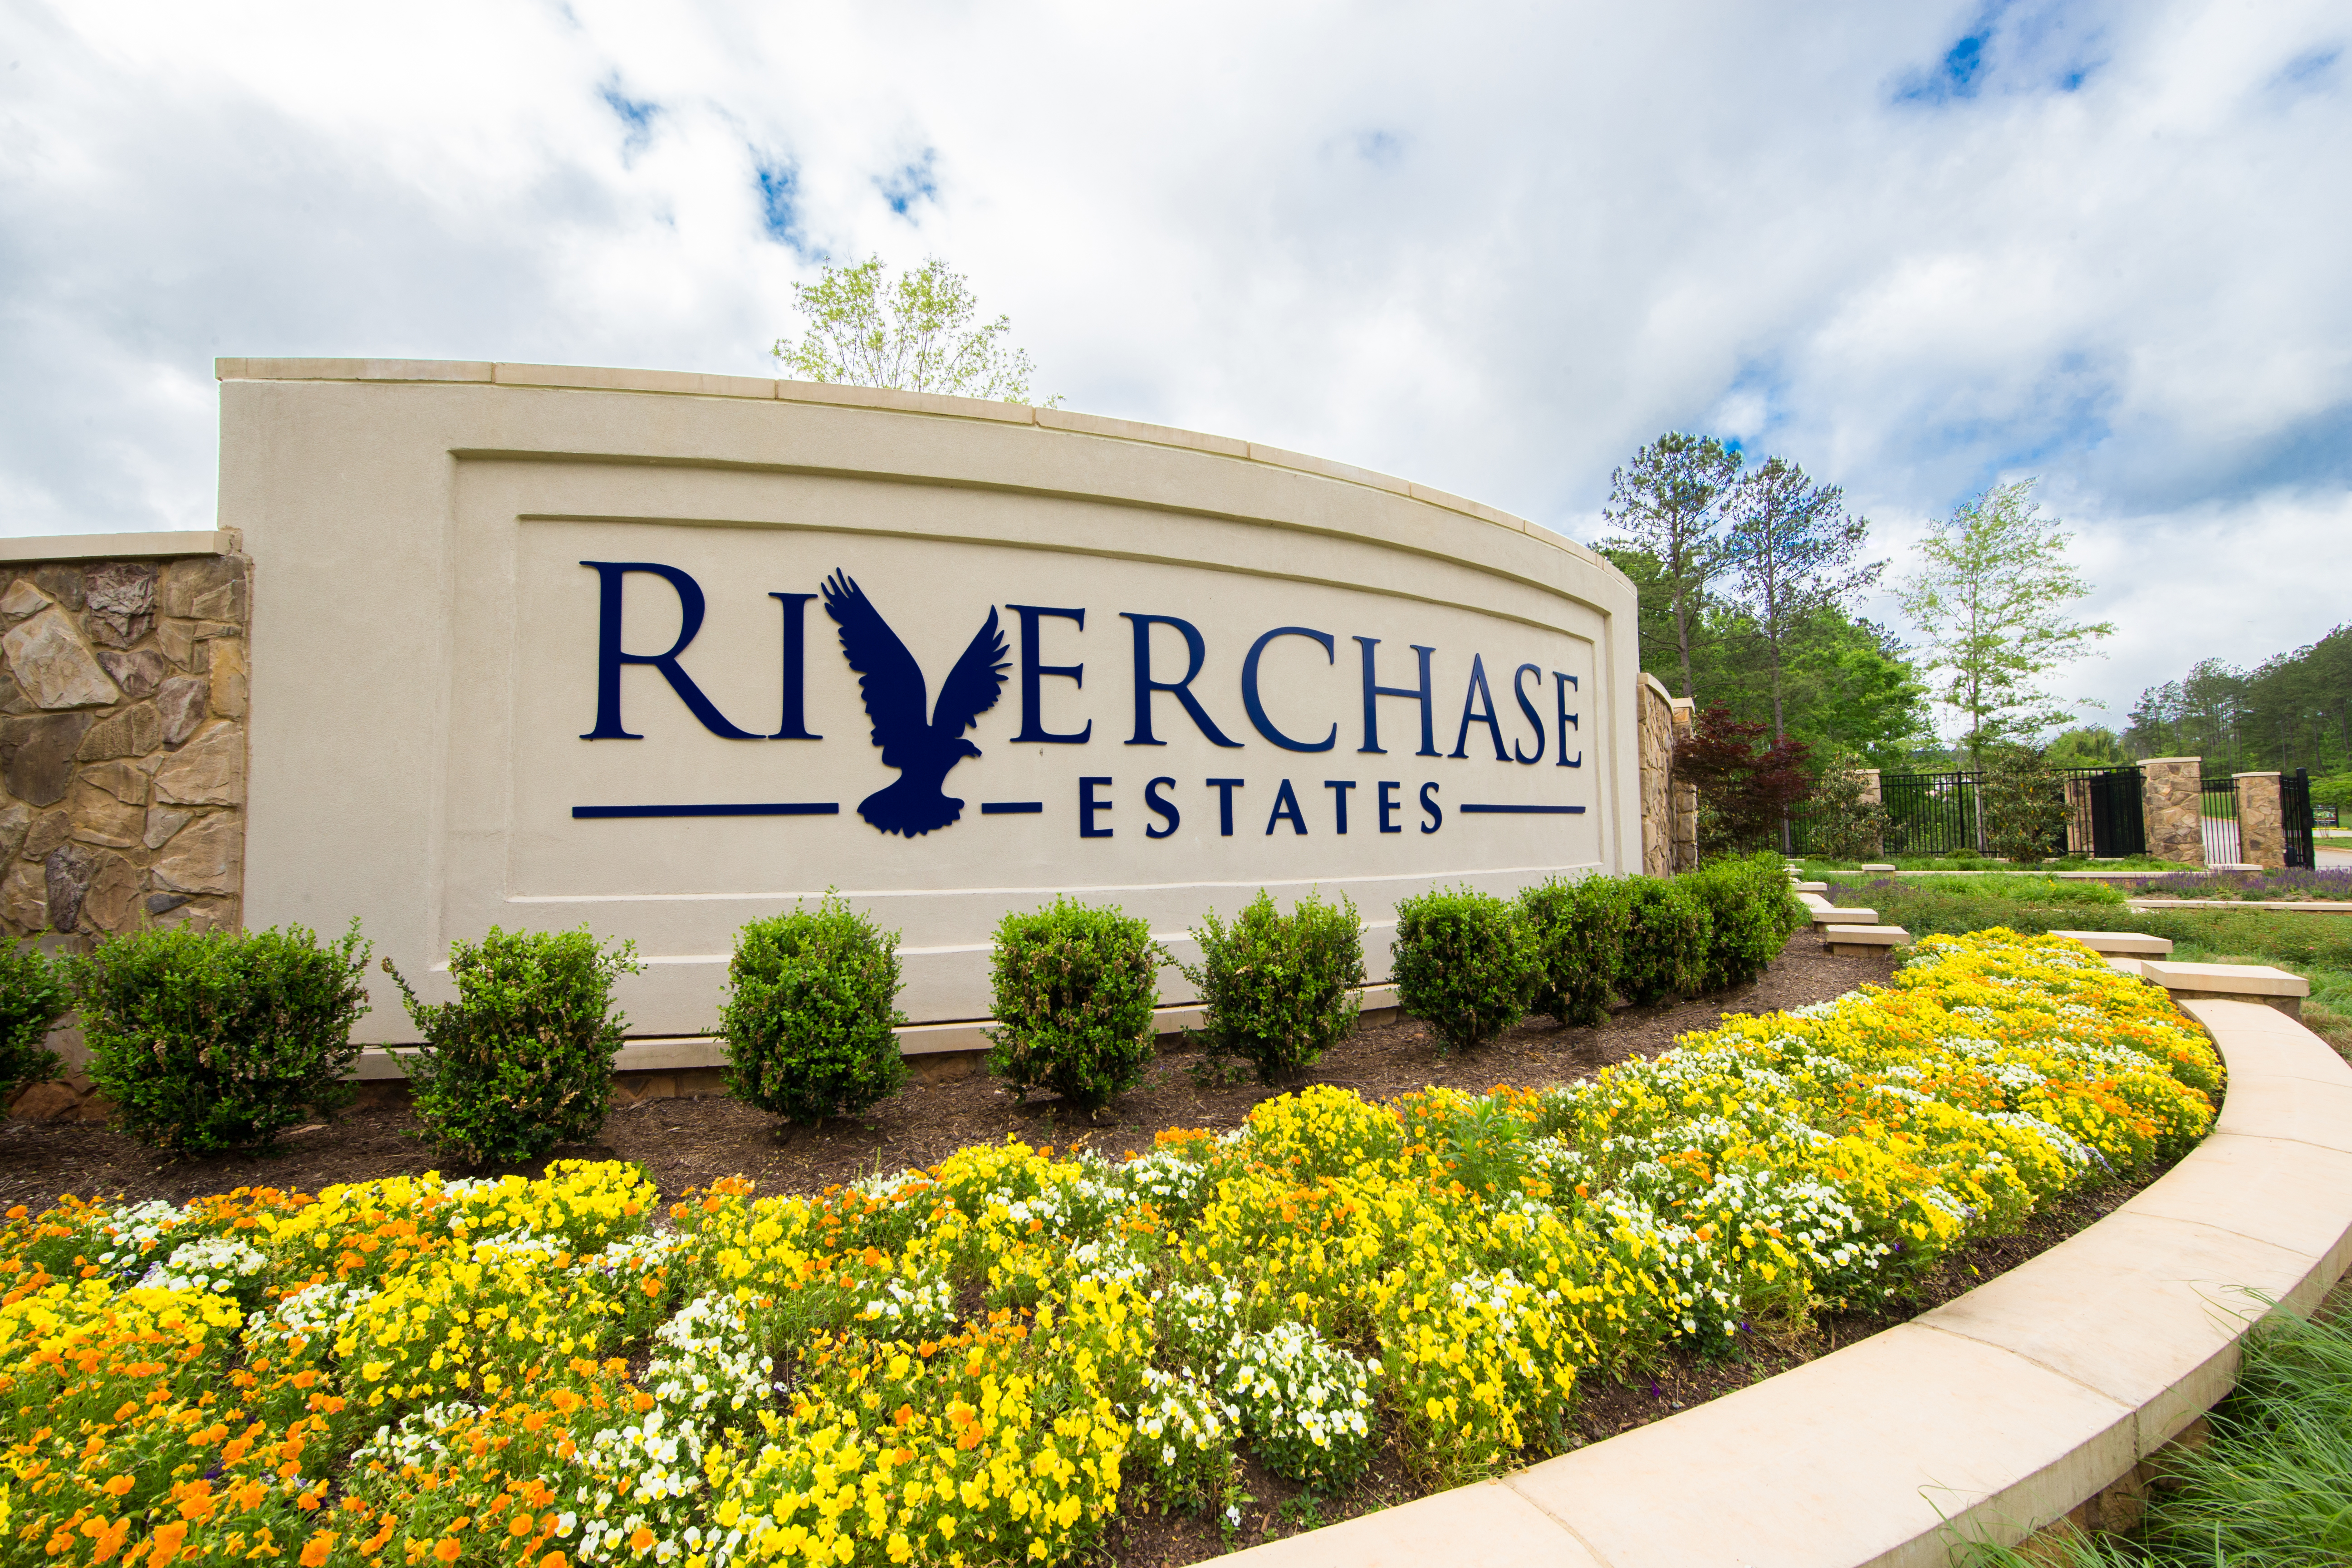 Riverchase Estates has lots available starting from $69,900.